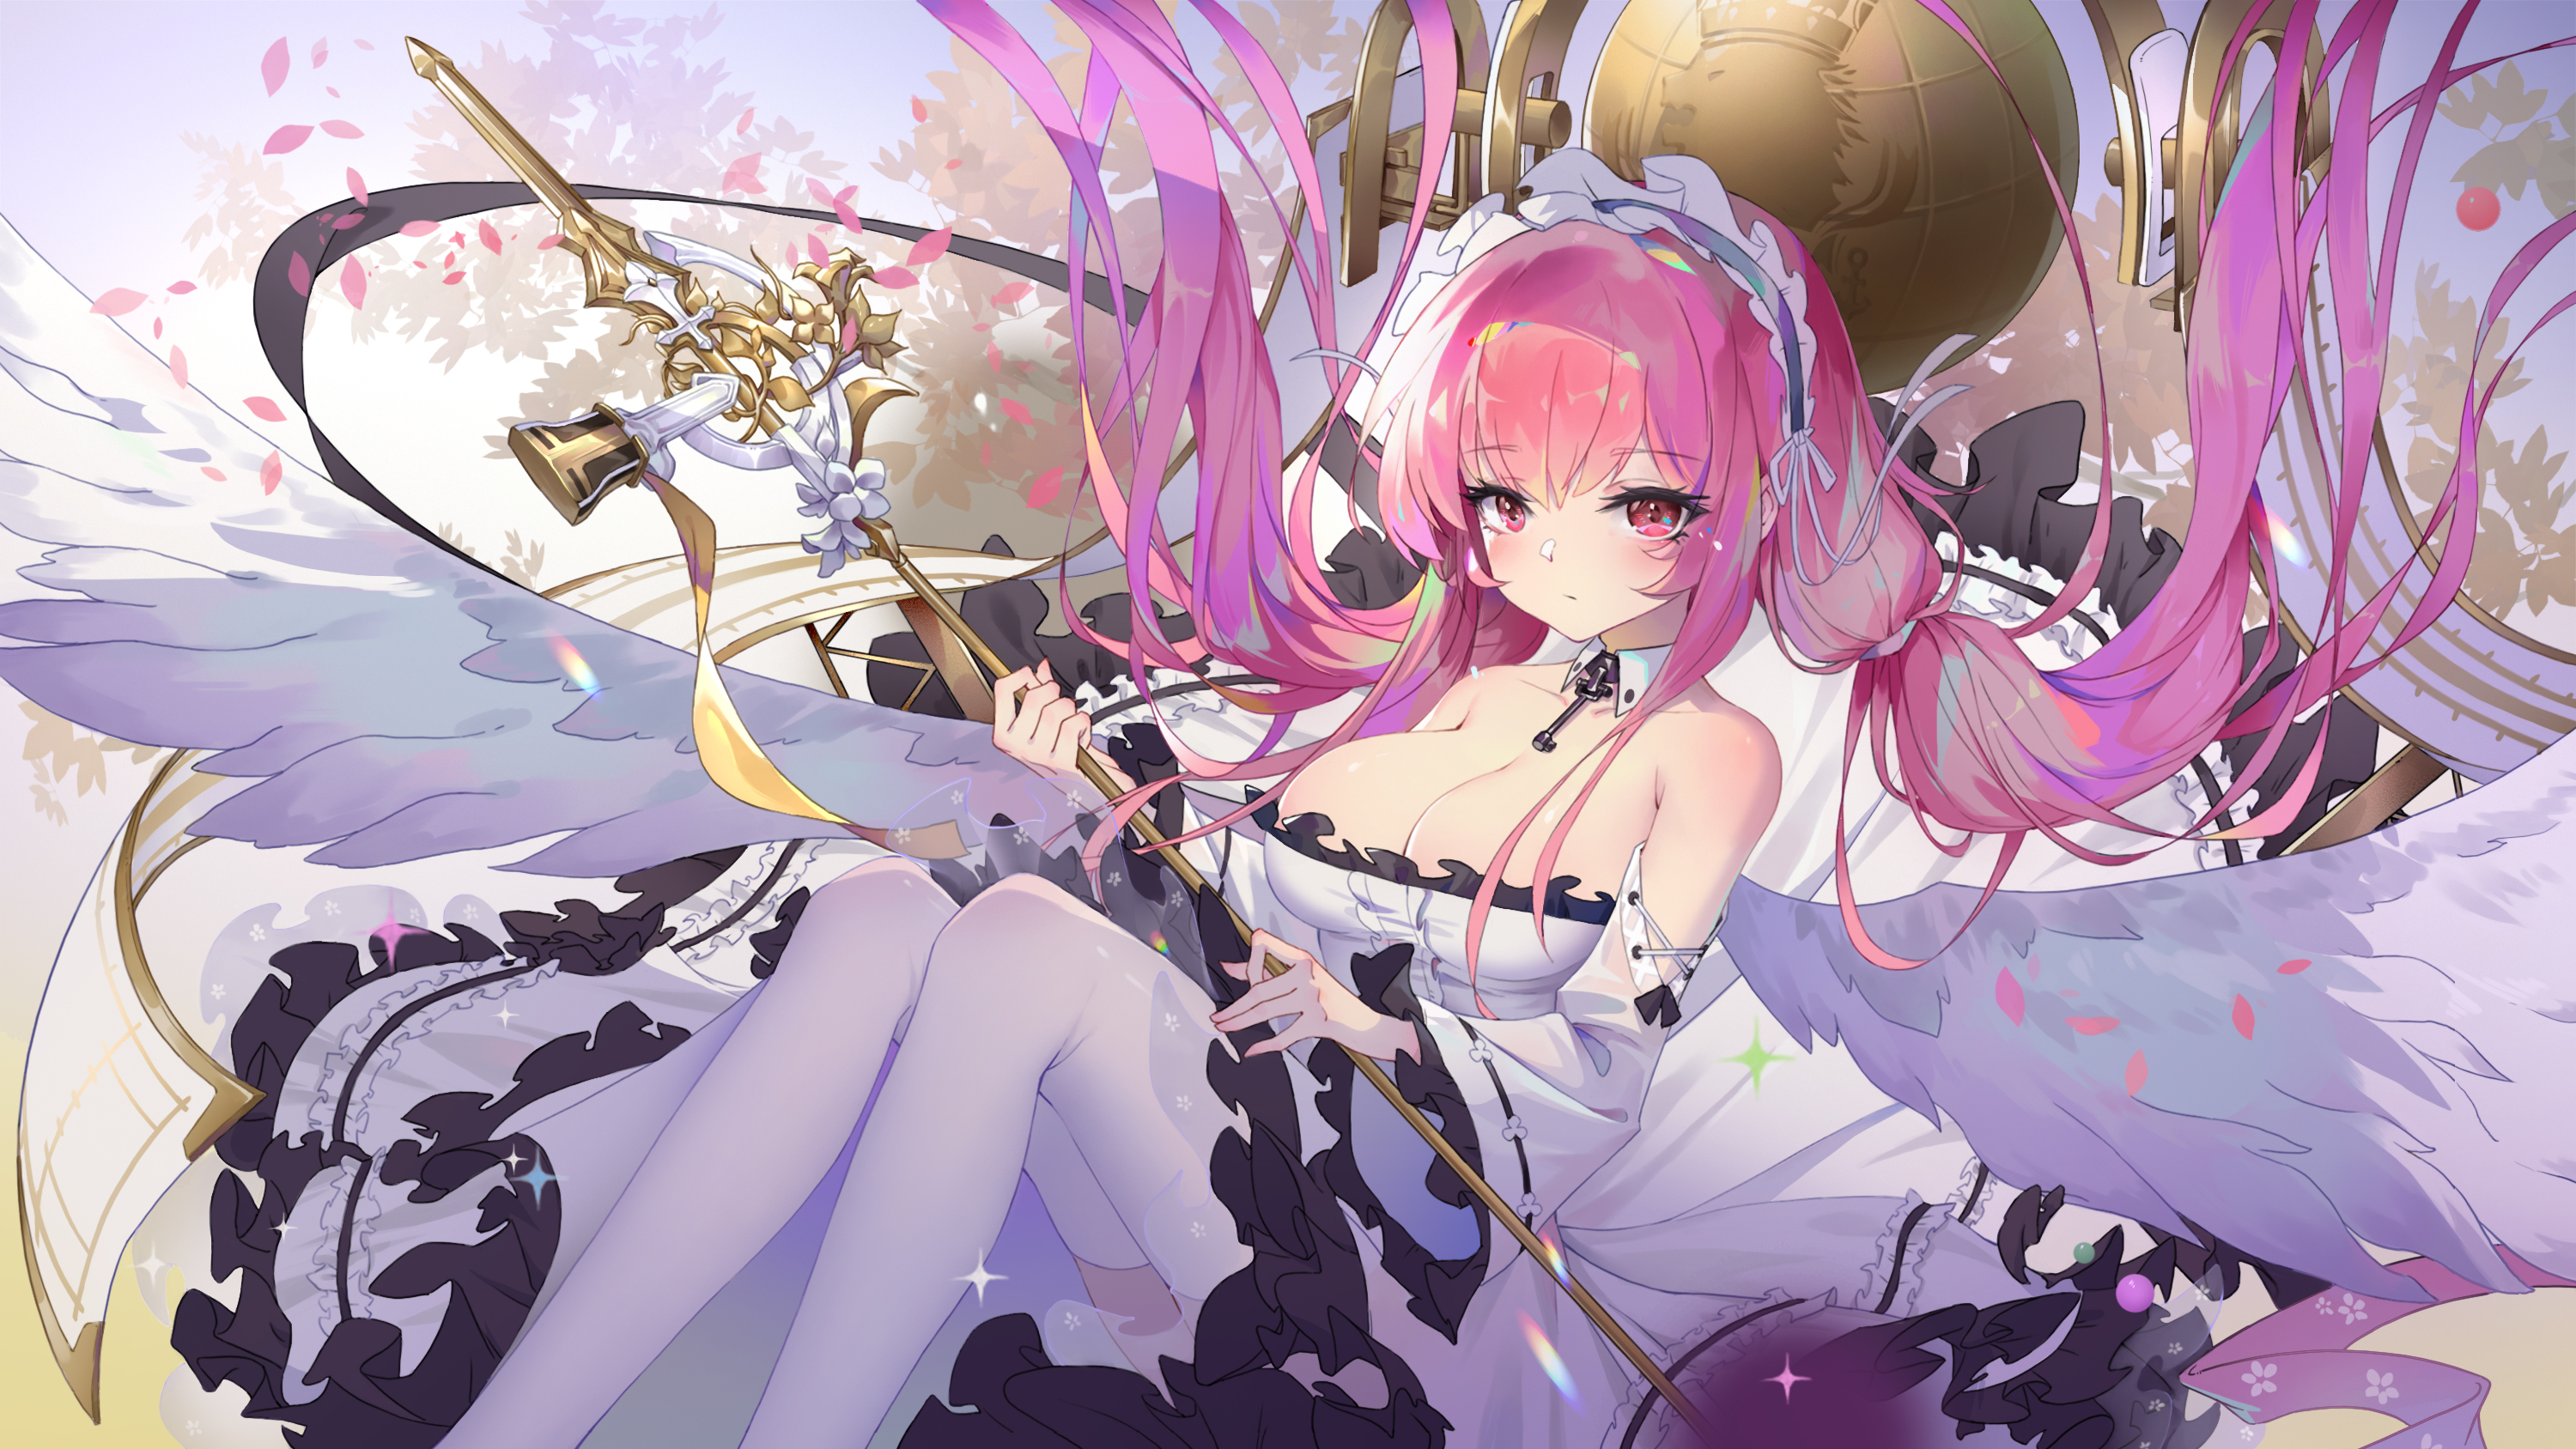 Anime 3000x1688 anime anime girls digital art artwork 2D portrait Azur Lane Perseus (Azur Lane) Moonofmonster pink hair pink eyes twintails wings thigh-highs dress maid outfit cleavage big boobs